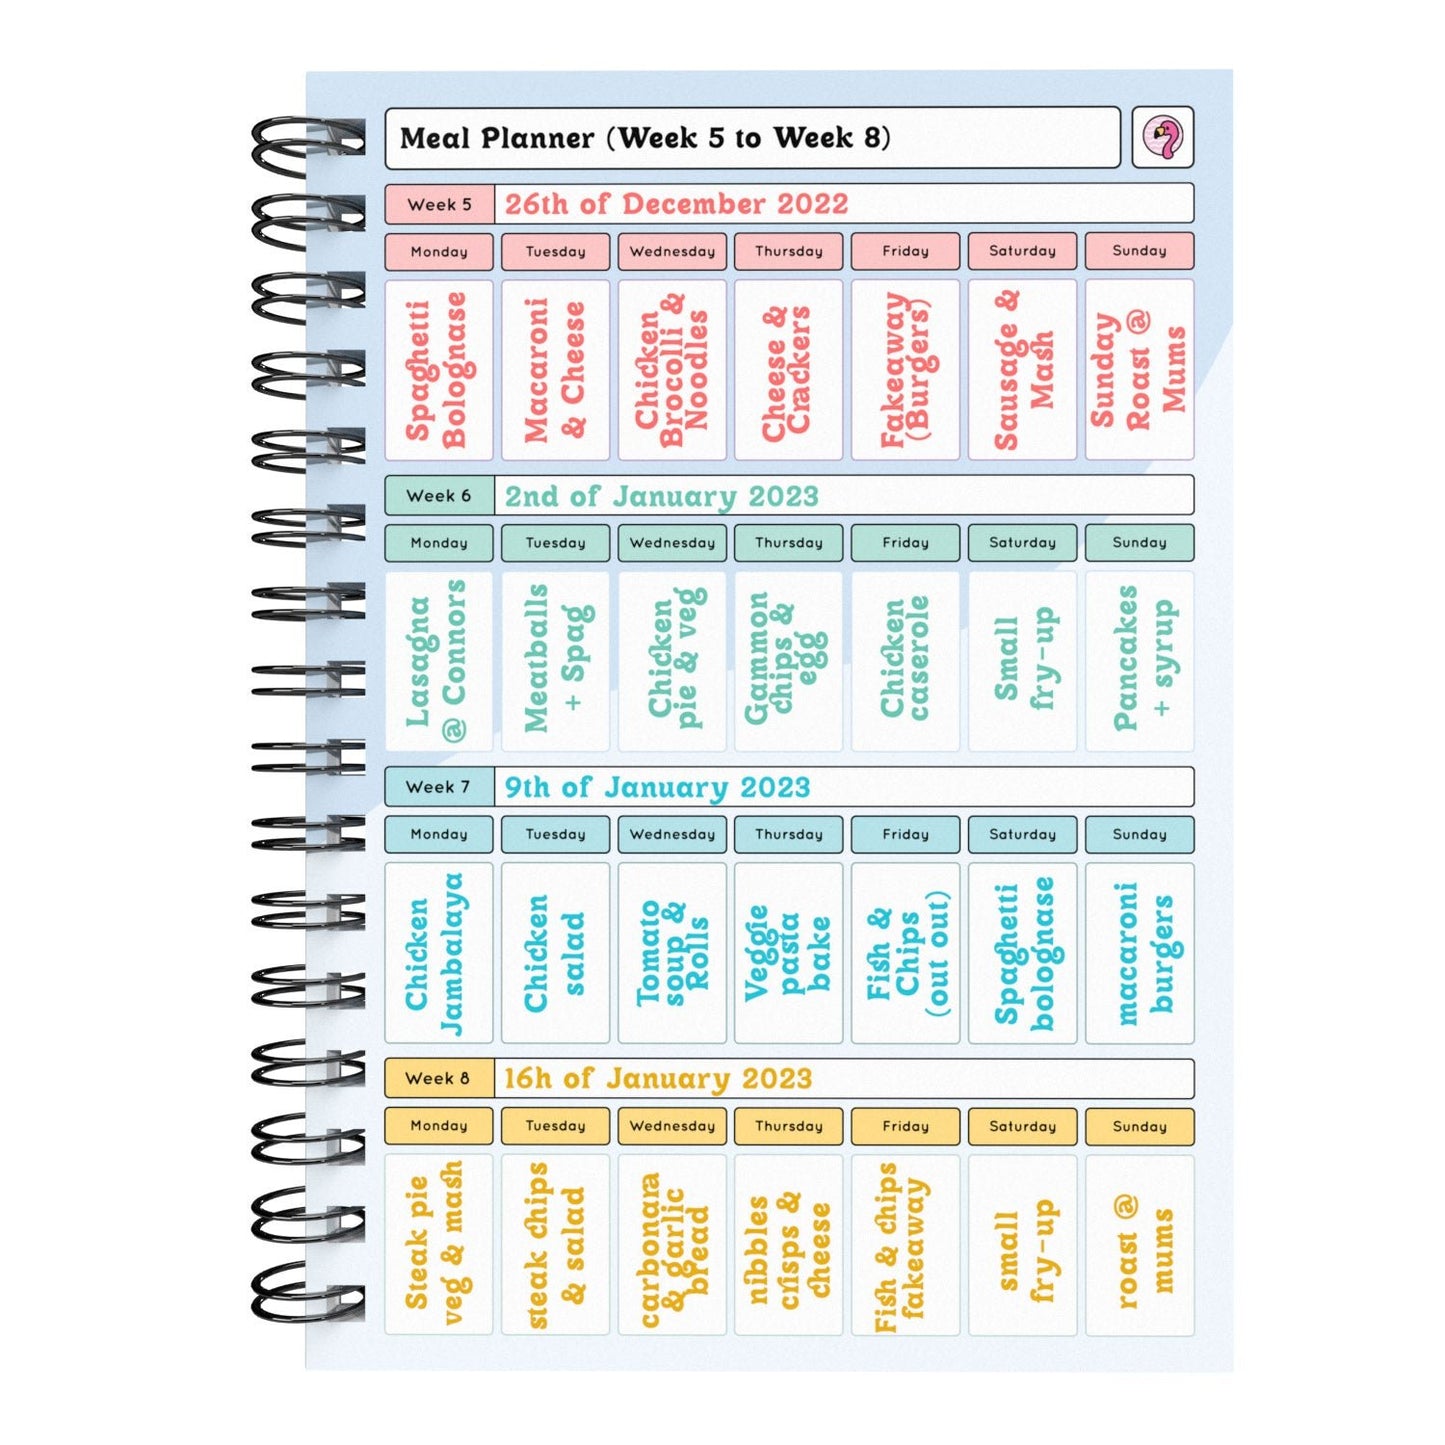 Food Diary - C71 - Calorie Counting - Fabulous Planning - [W] 3MTH - CAL - C71+